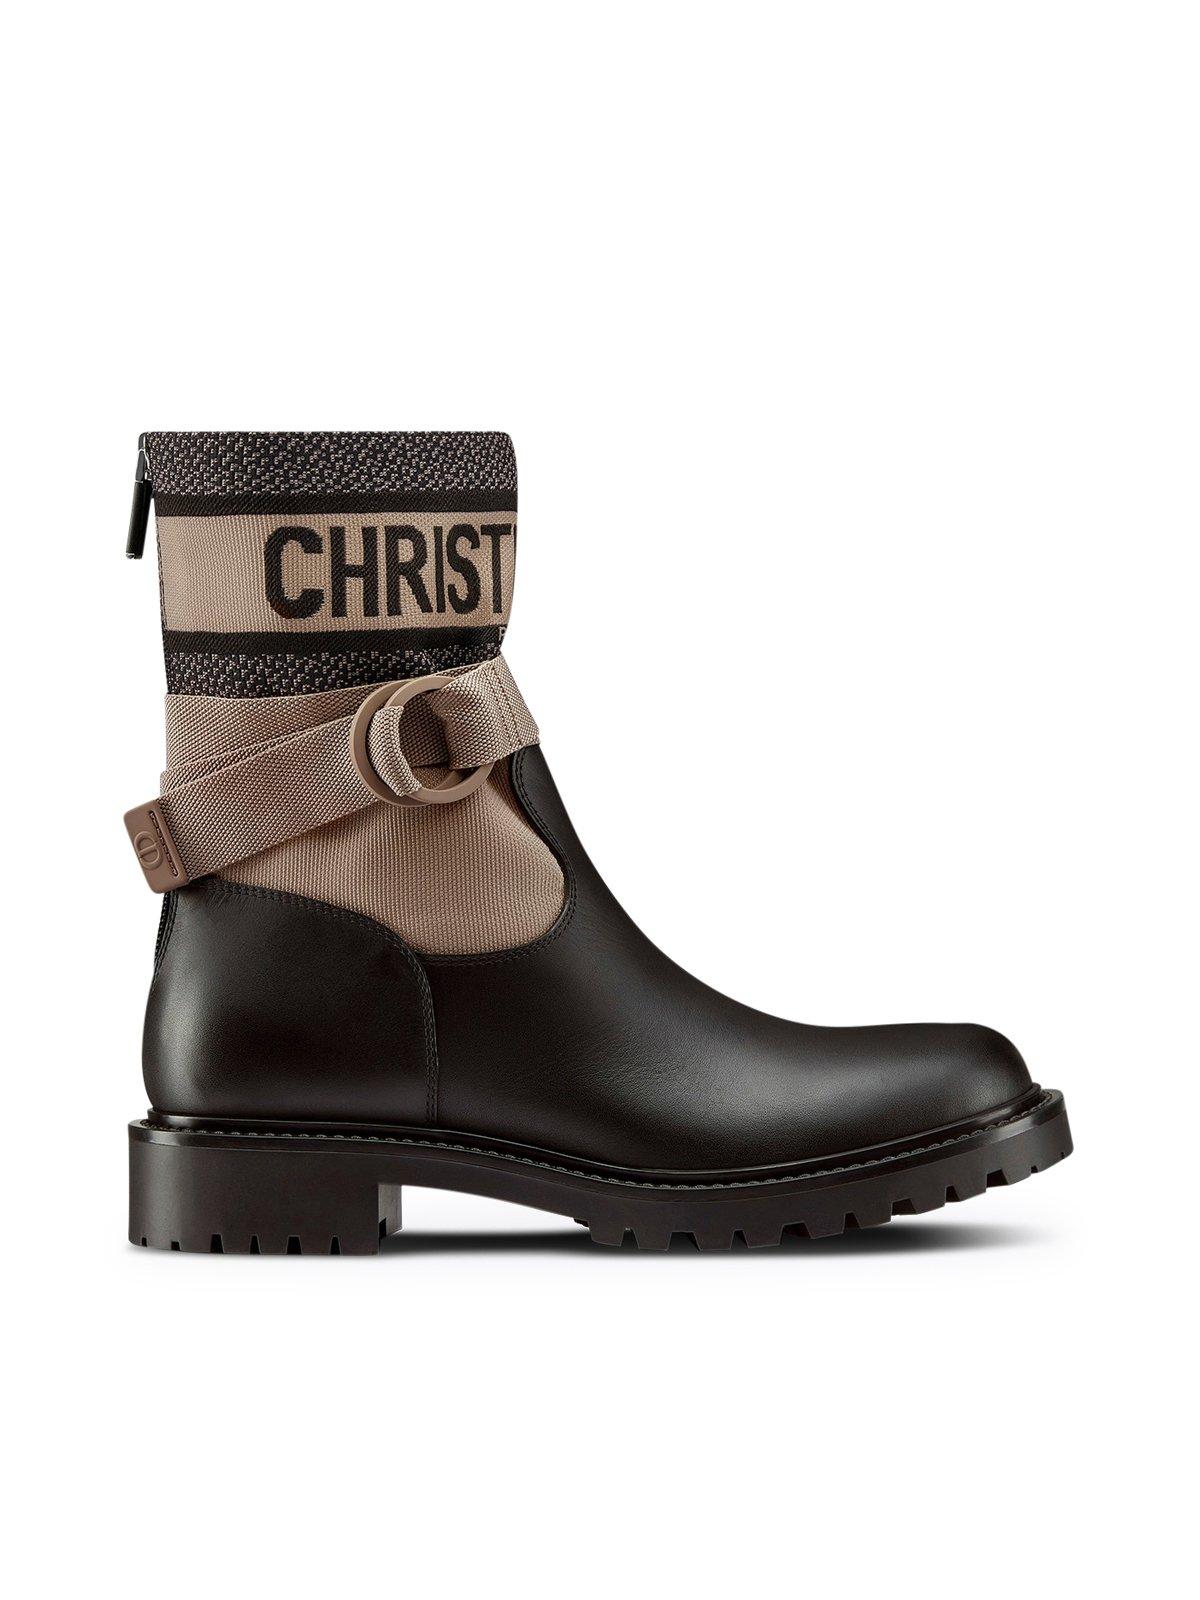 Dior D-Major Ankle Boot